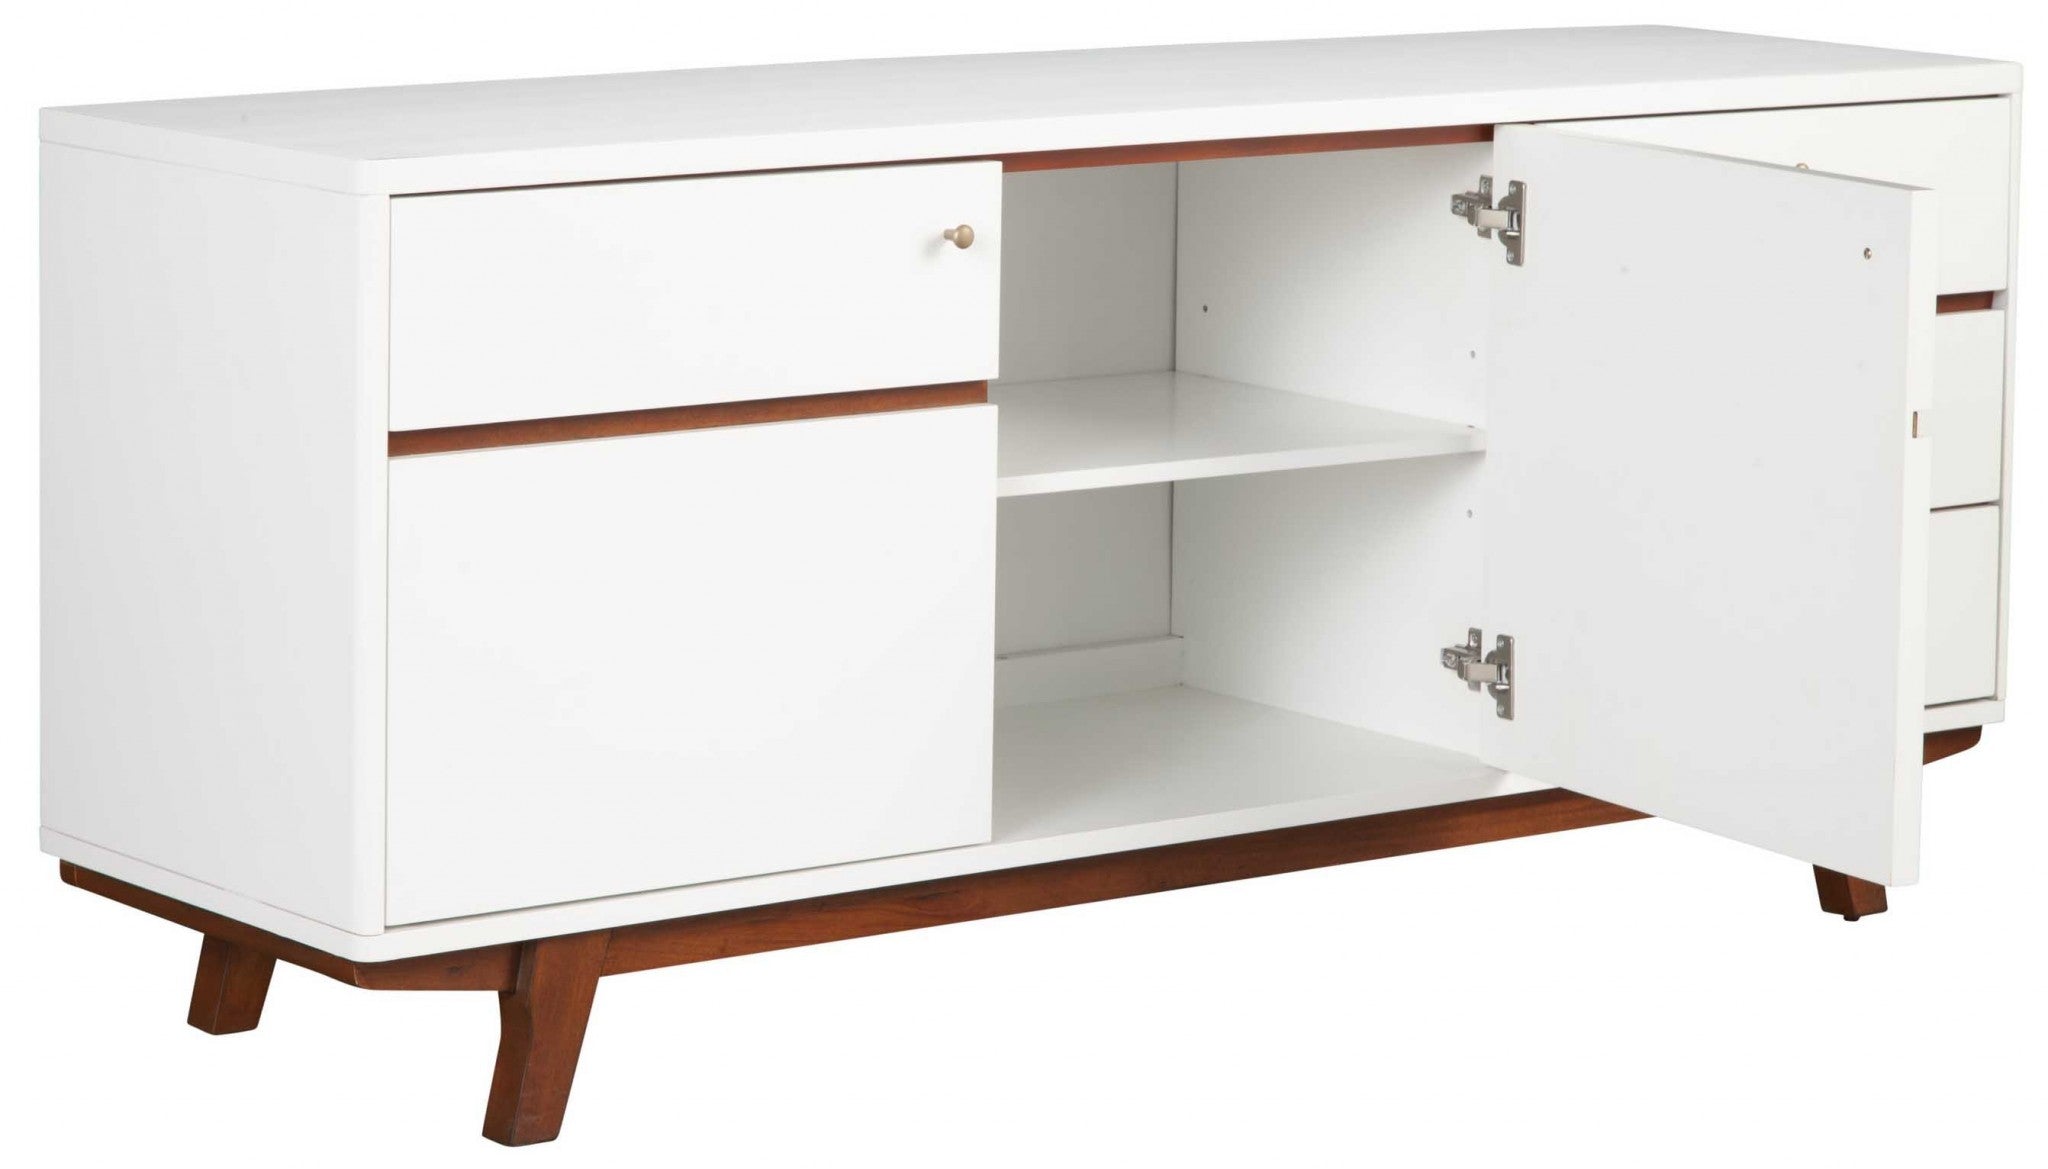 65" White Mahogany Solids And Veneer Cabinet Enclosed Storage TV Stand